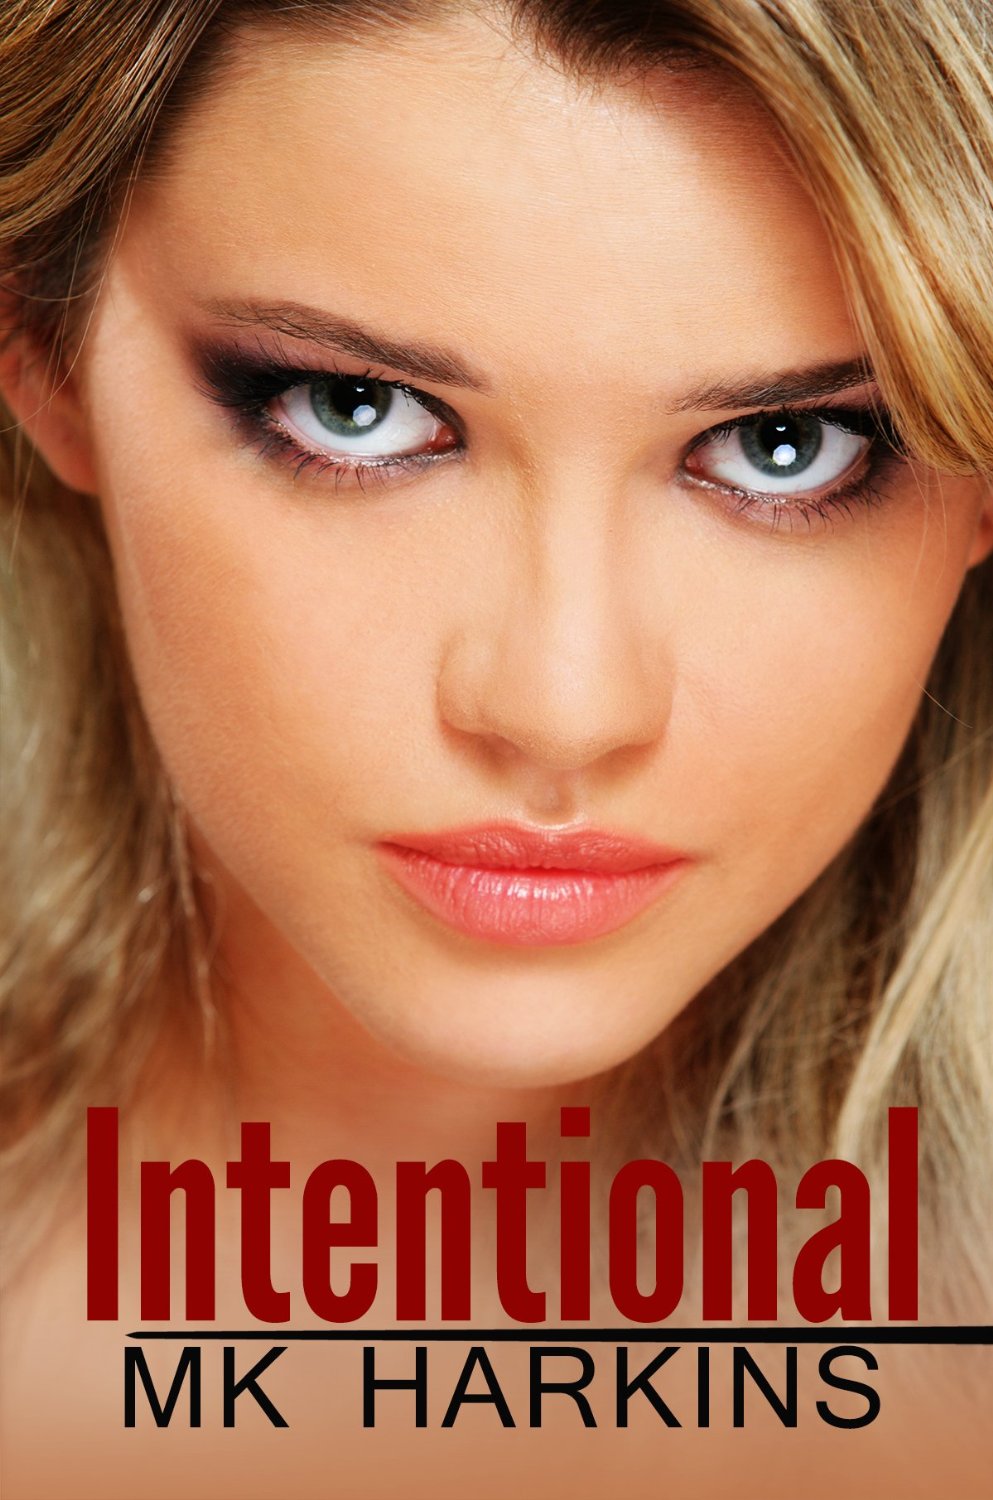 Intentional by MK Harkins